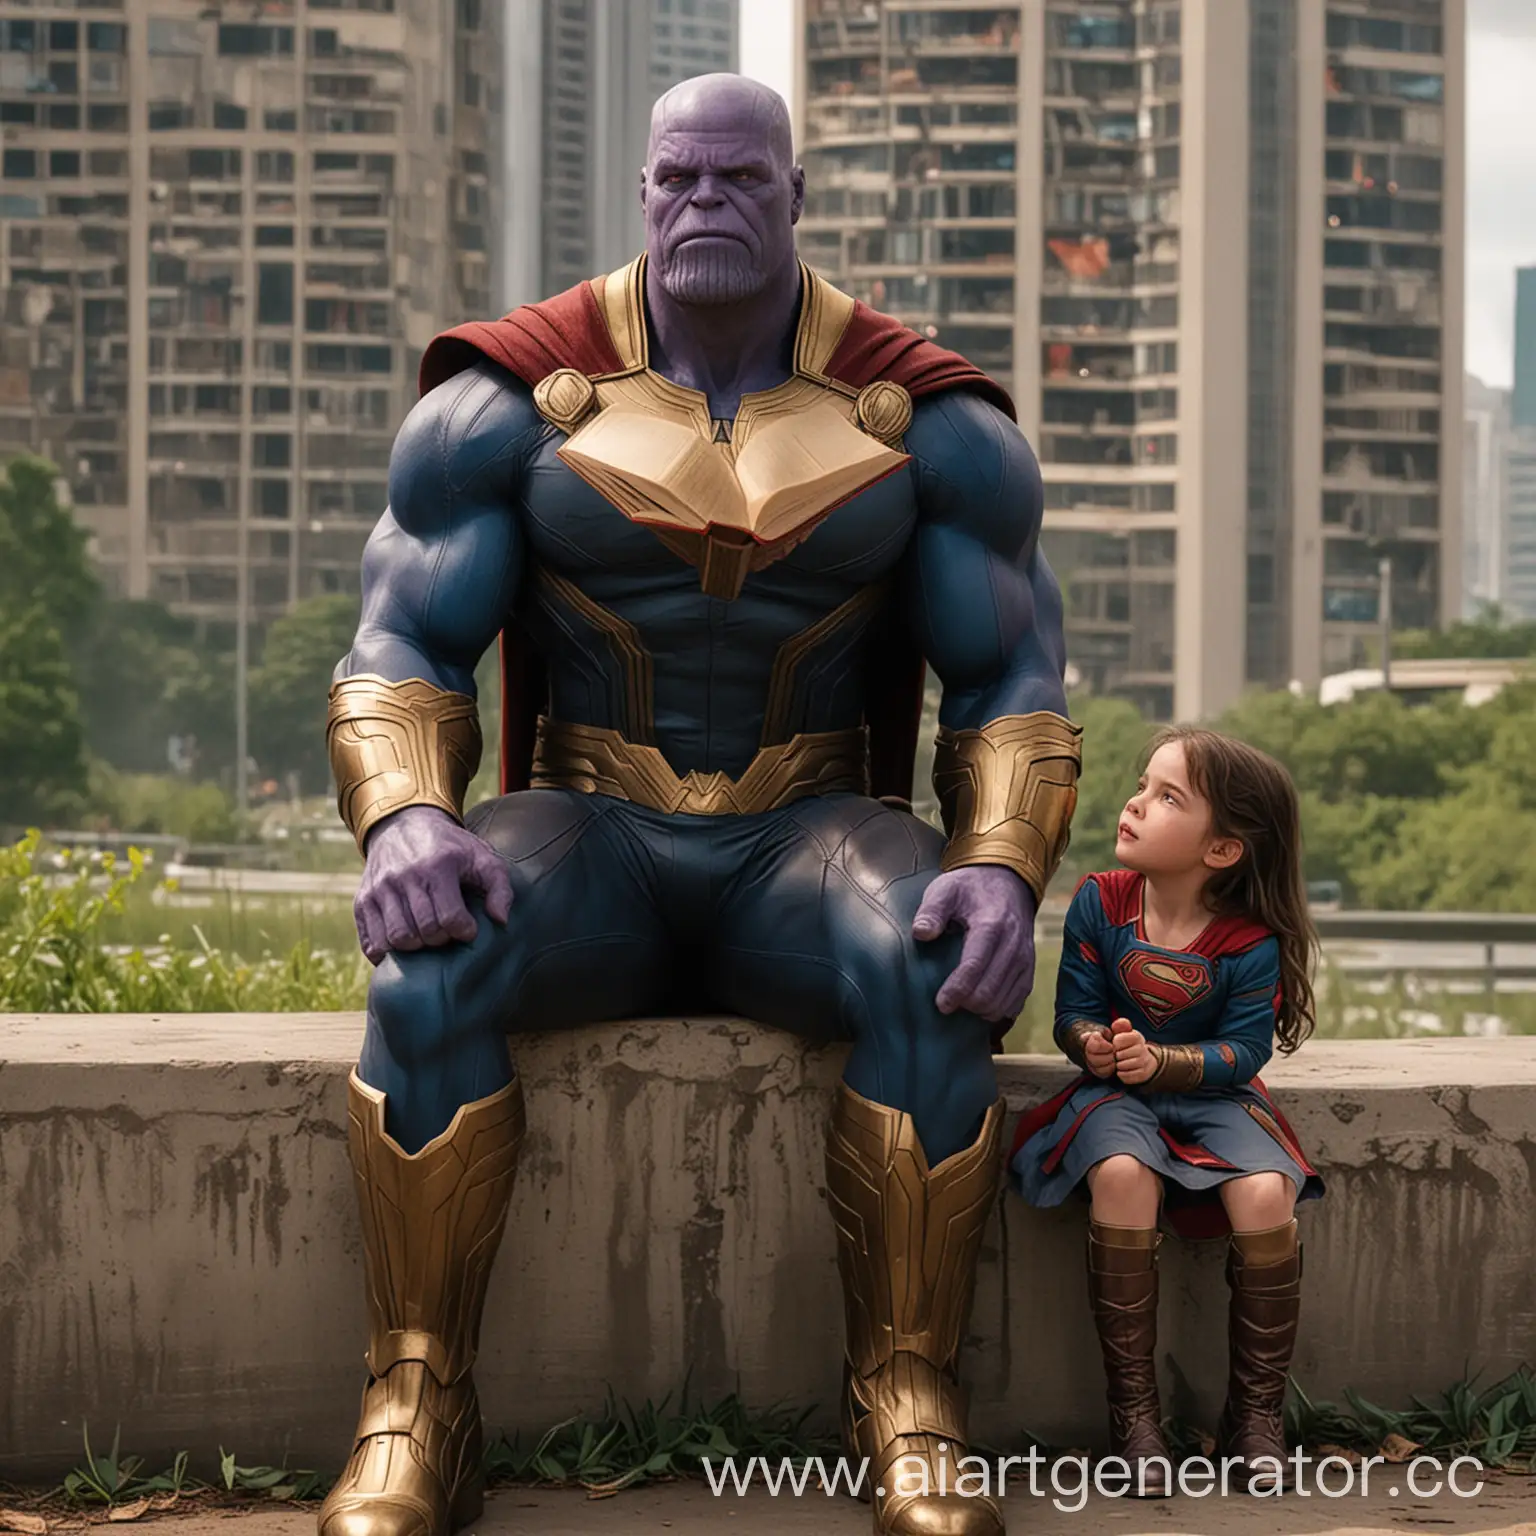 A little girl sits on a bench in a park, reading a book. Suddenly, Thanos forcefully takes the little girl from the park. Superman, standing on top of a tall building, hears a cry for help. He flies to the rescue, and punches Thanos who is forcefully taking the little girl. A fierce battle ensues between Superman and Thanos, but Superman ultimately defeats Thanos.